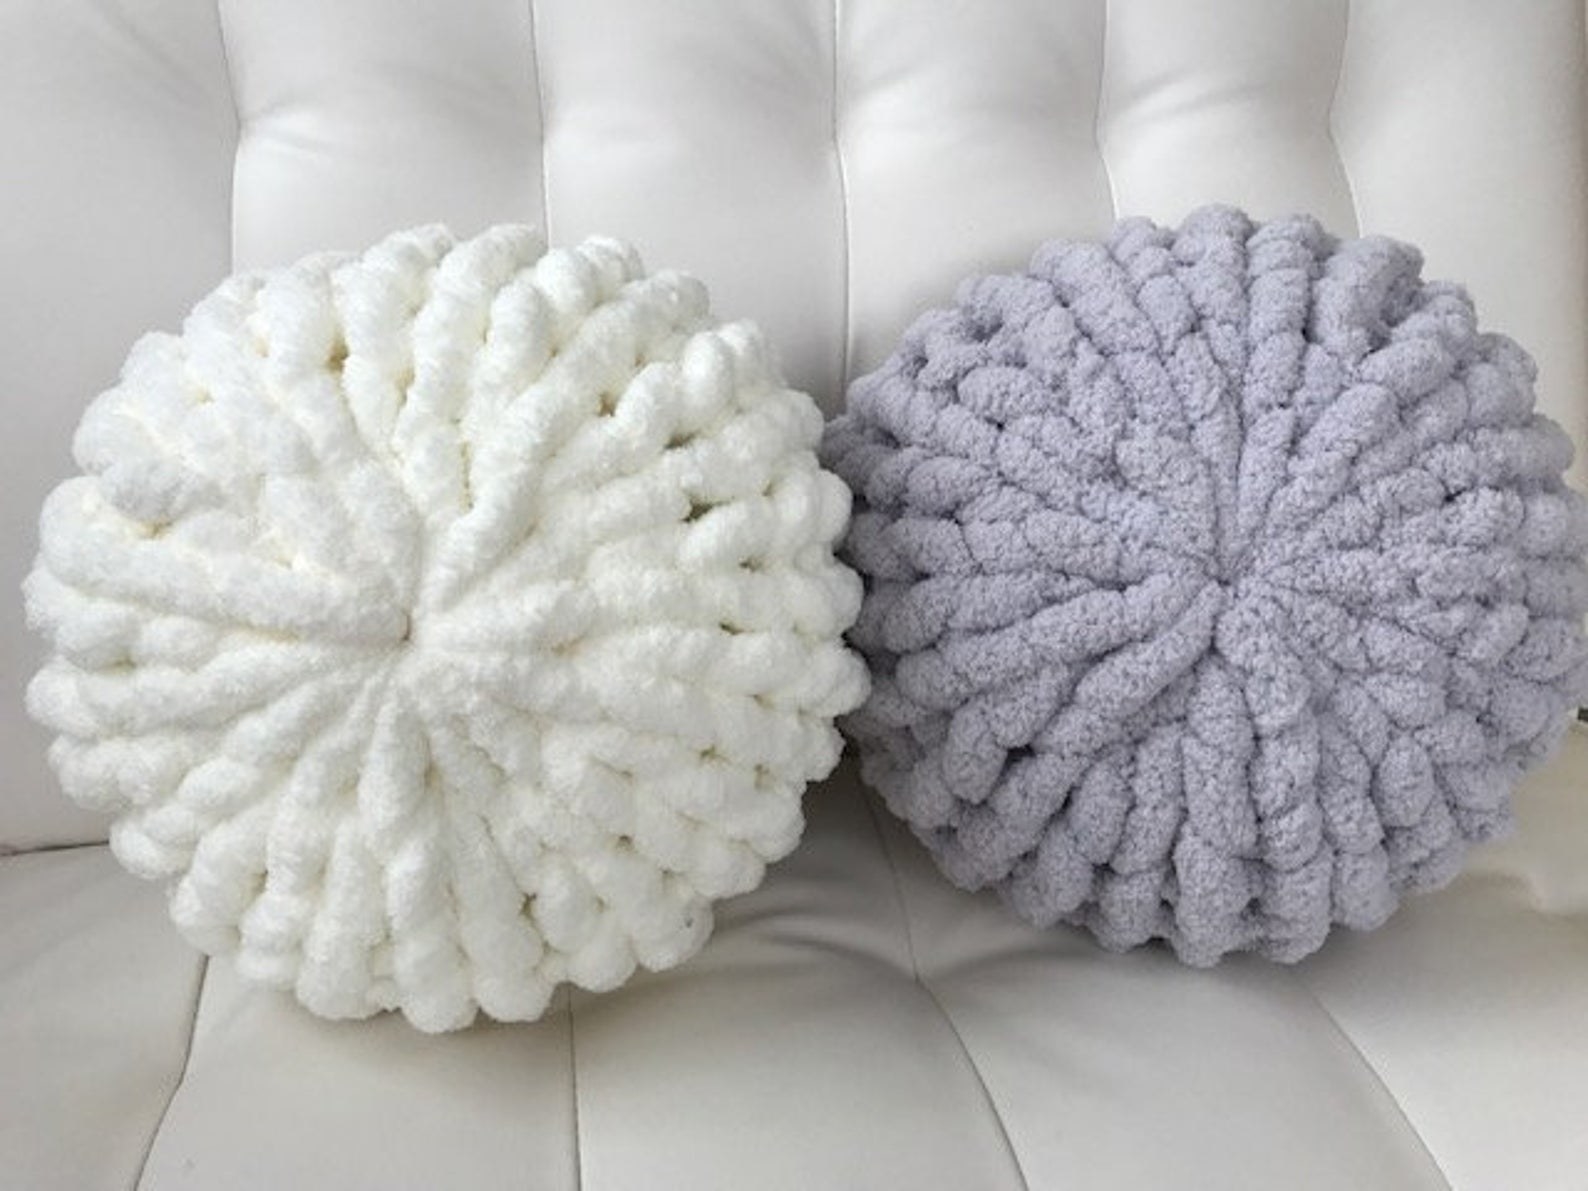 The white and grey thick ball pillows